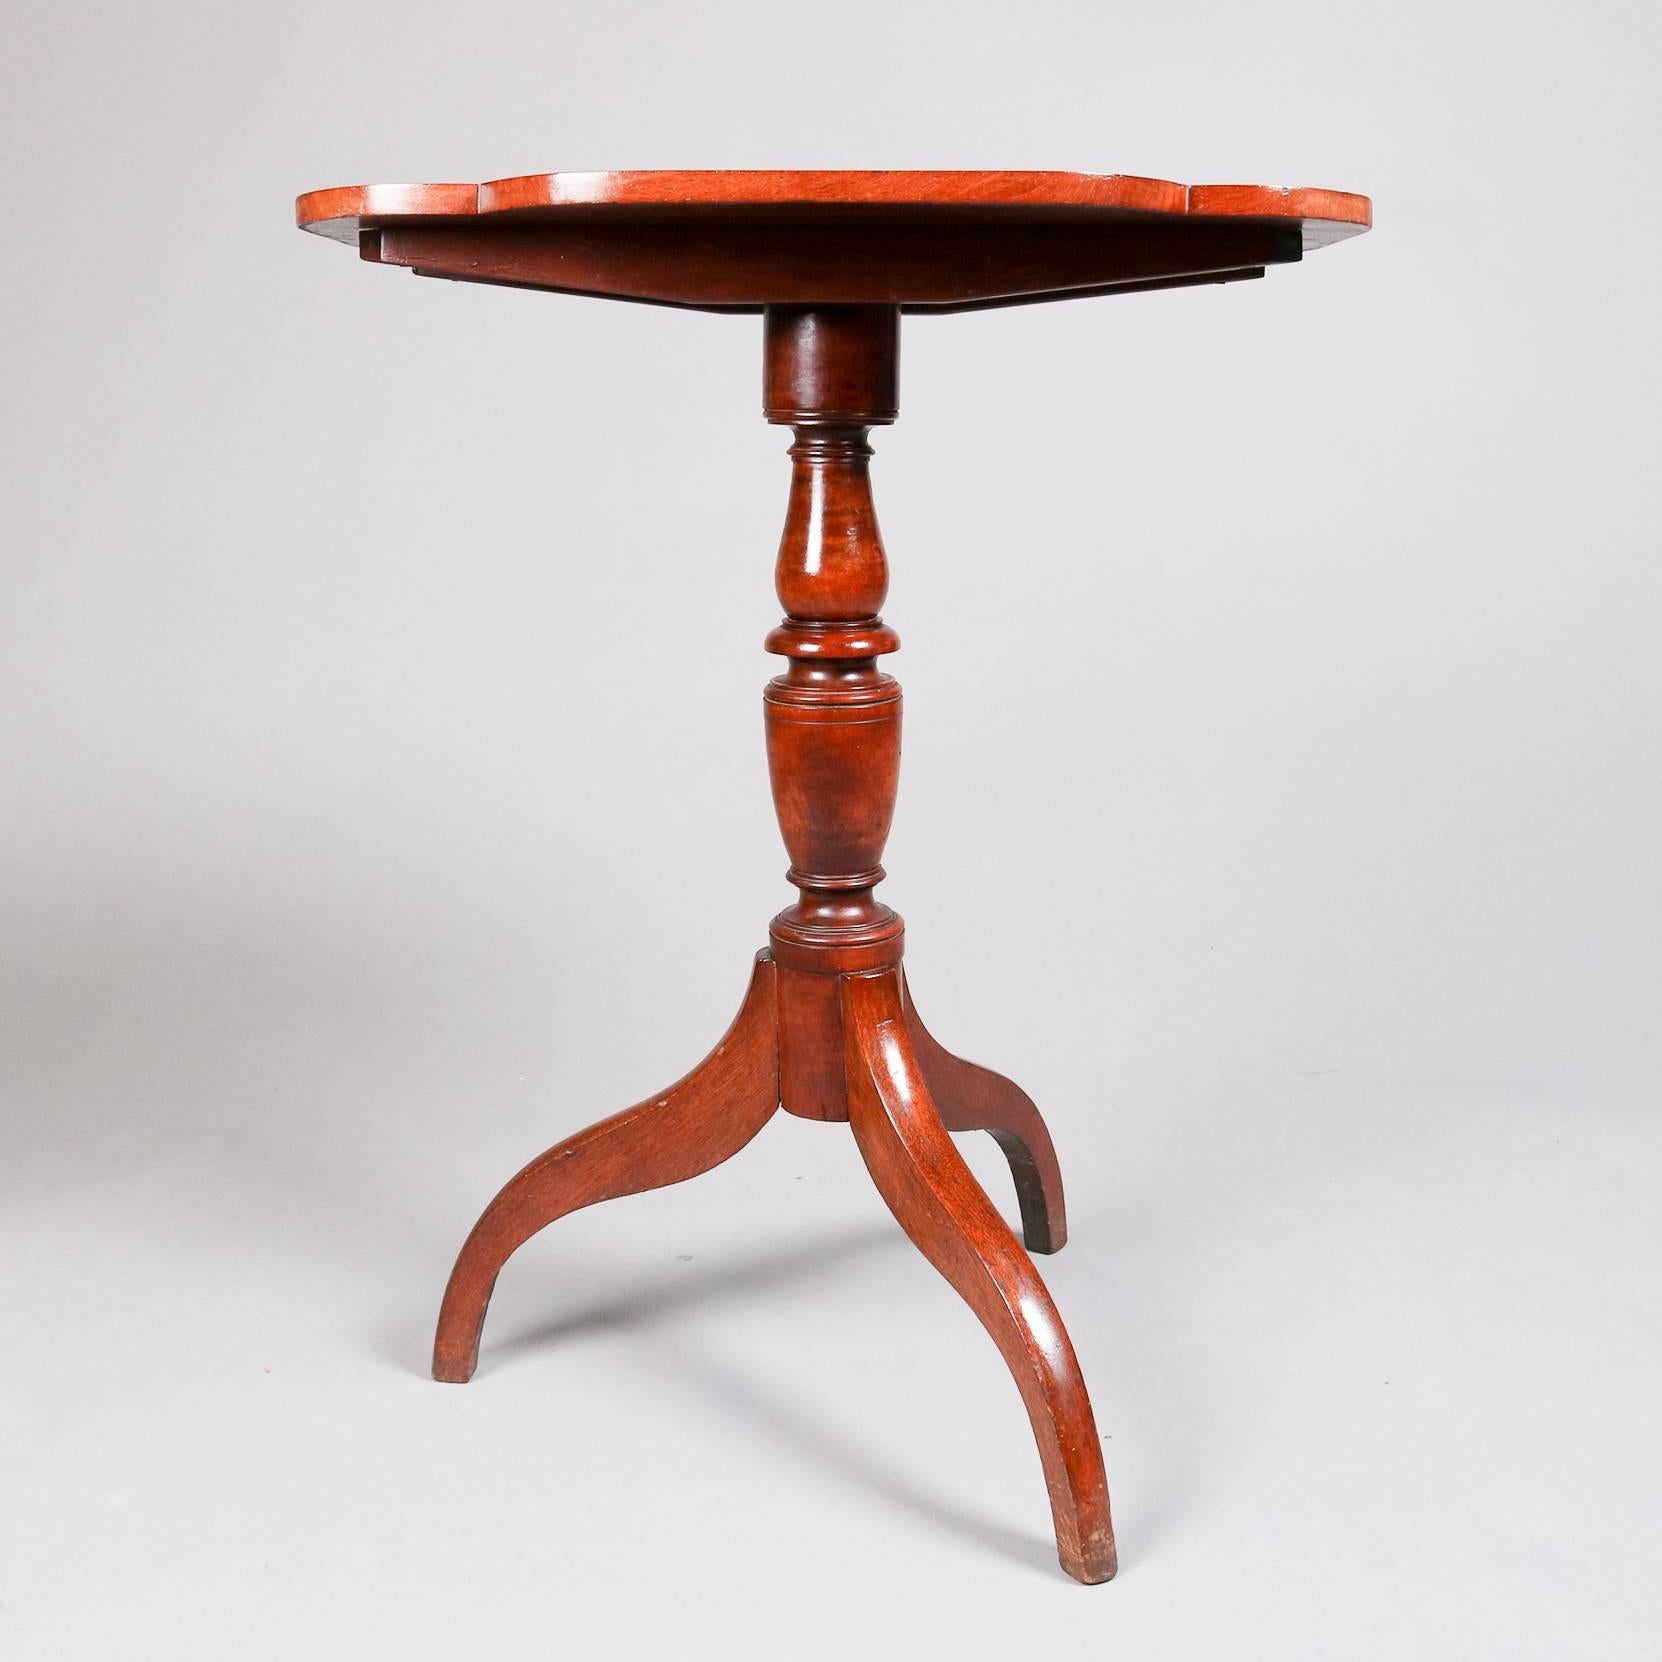 Antique Federal candle stand features mahogany construction with shaped tilt top, turned plinth and spider legs, 19th century

Measures - tilt: 42